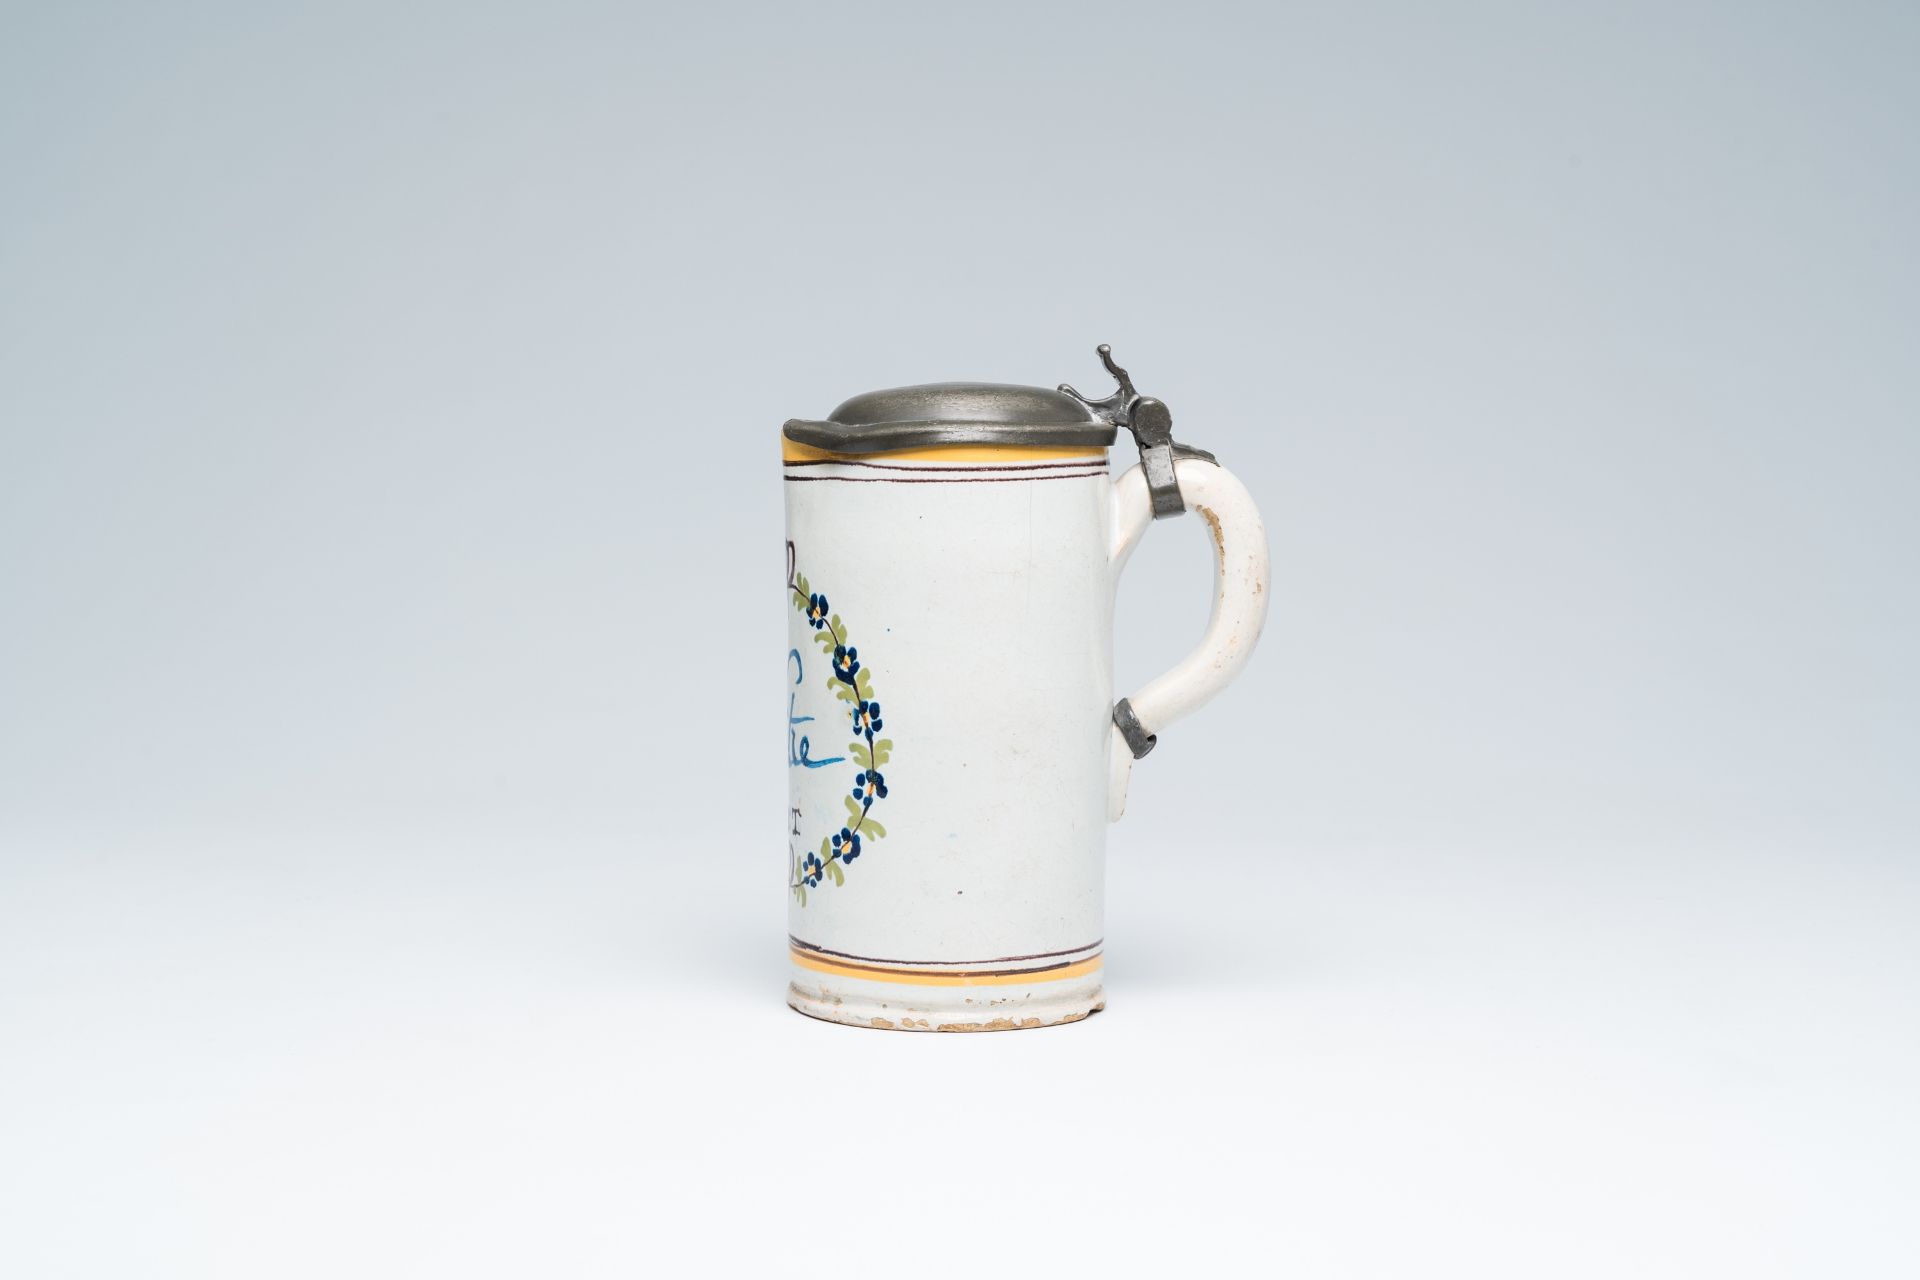 A Tournai polychrome liter jug with pewter cover and floral design, period de Bettignies, vers 1800 - Image 2 of 9